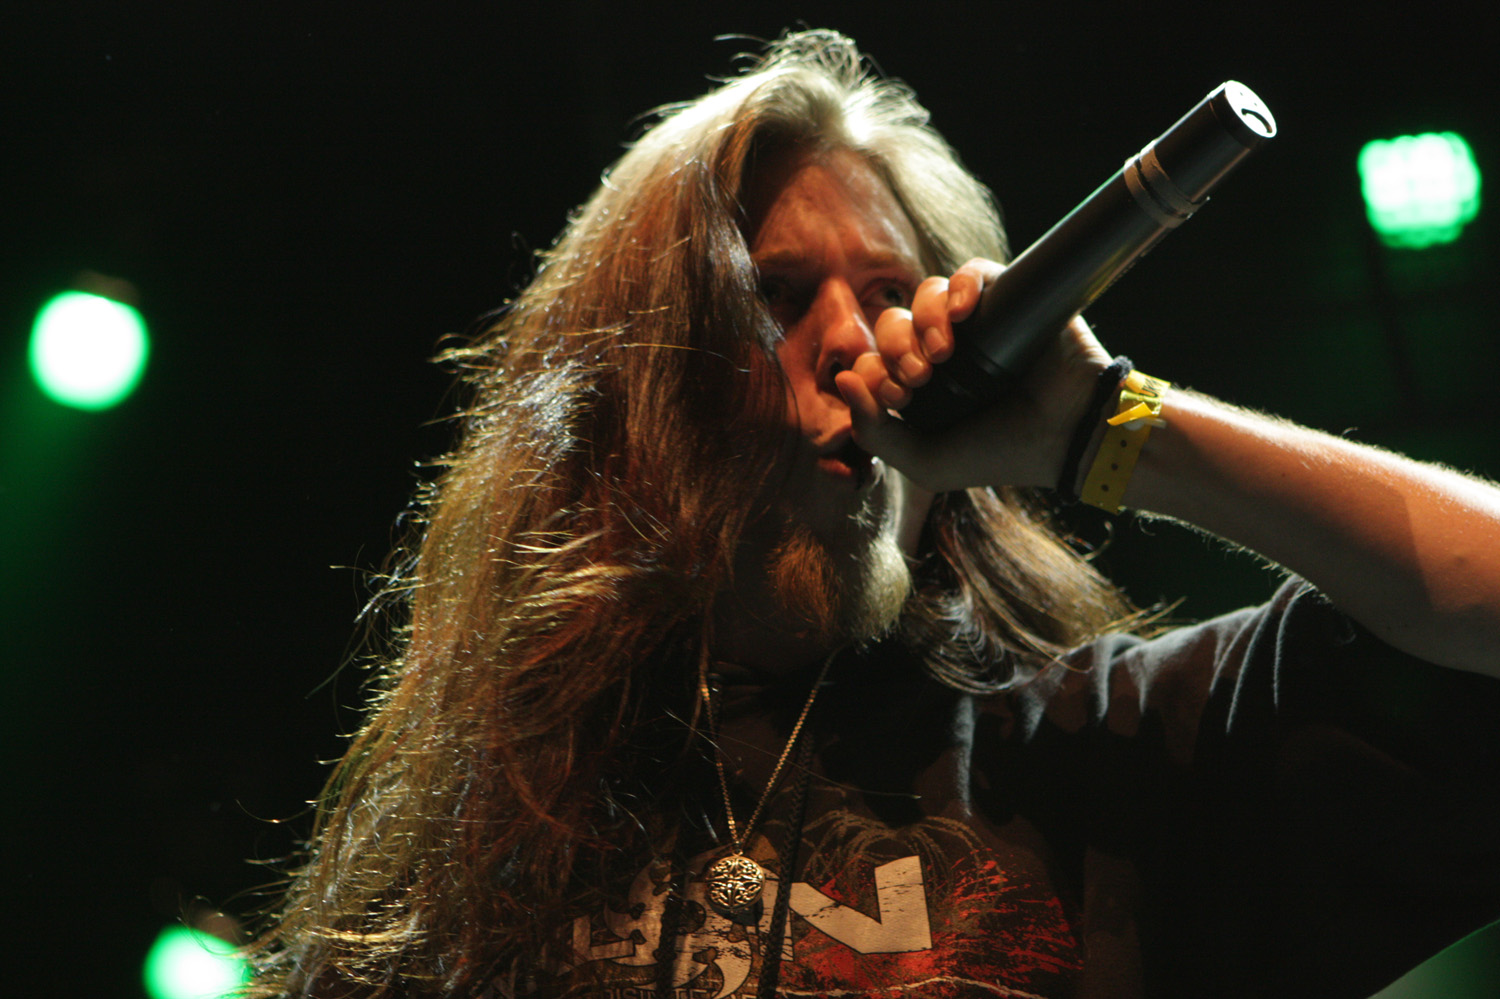 the singer has long hair, and he is holding a microphone